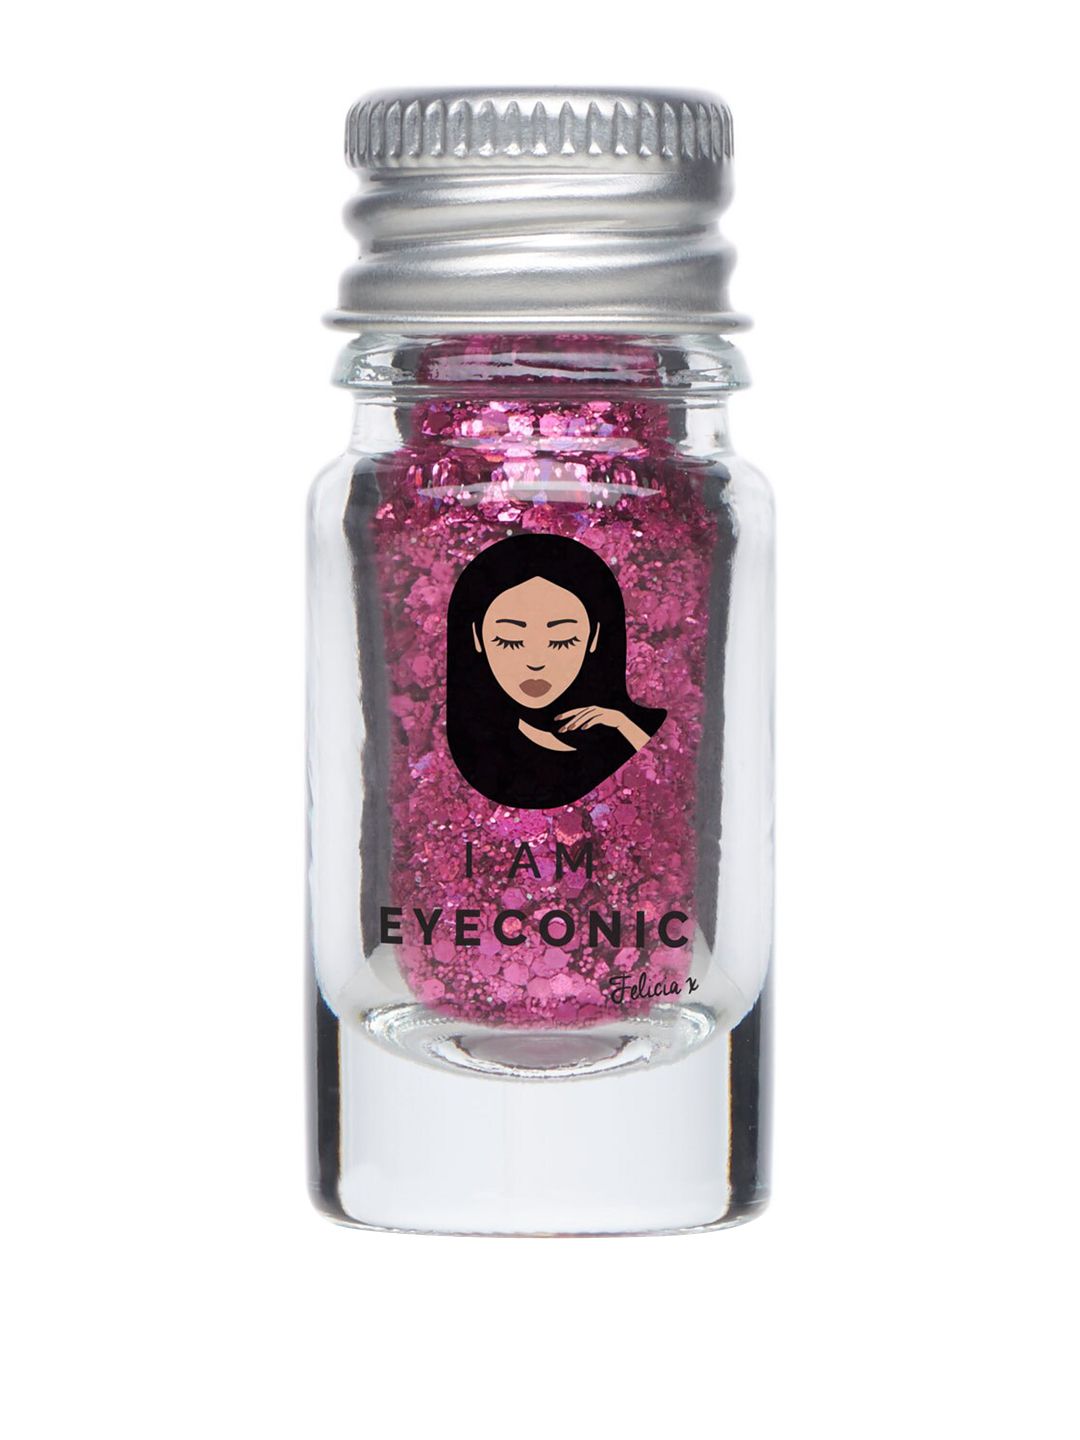 I AM EYECONIC 3D Cosmetic Glitters 4 g - Mermaid Kiss Price in India